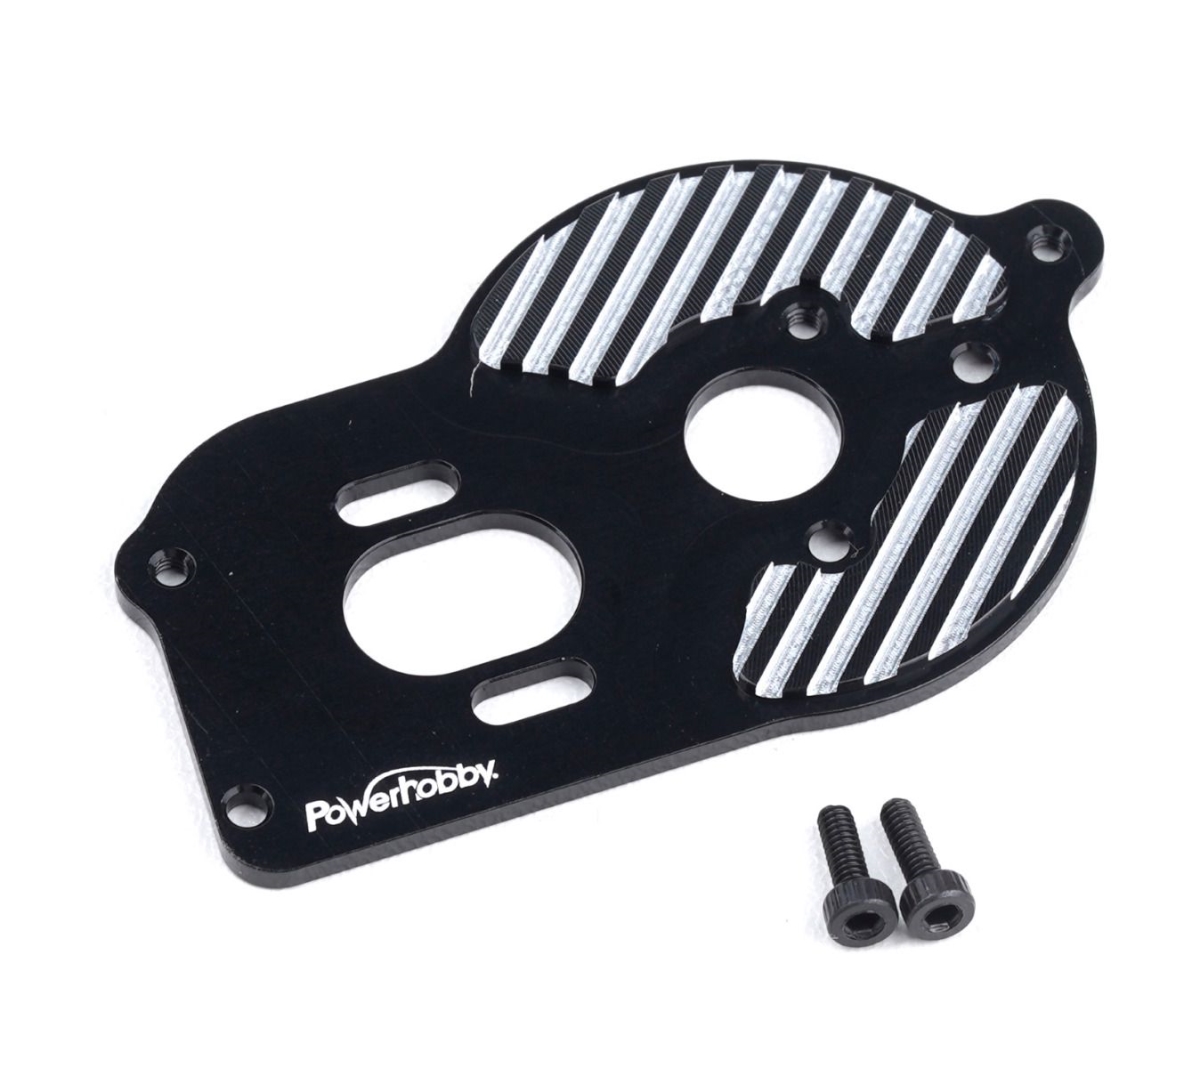 Picture of Power Hobby PHB5837 Adjustable Aluminum Motor Mount for Losi Mini-T 2.0